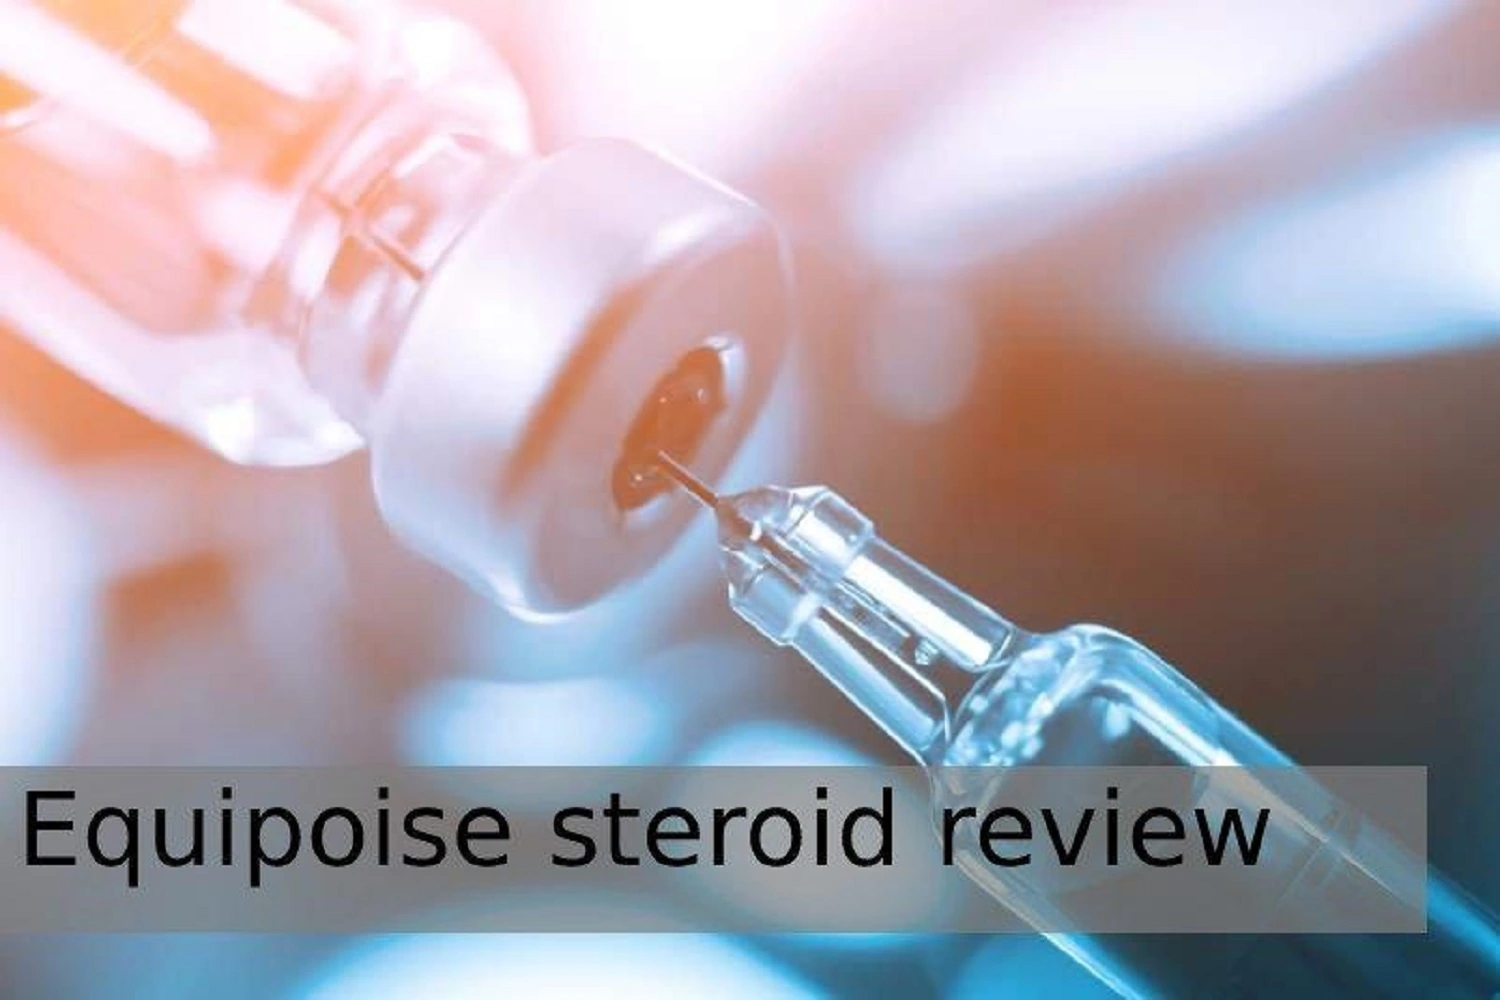 Equipoise steroid review